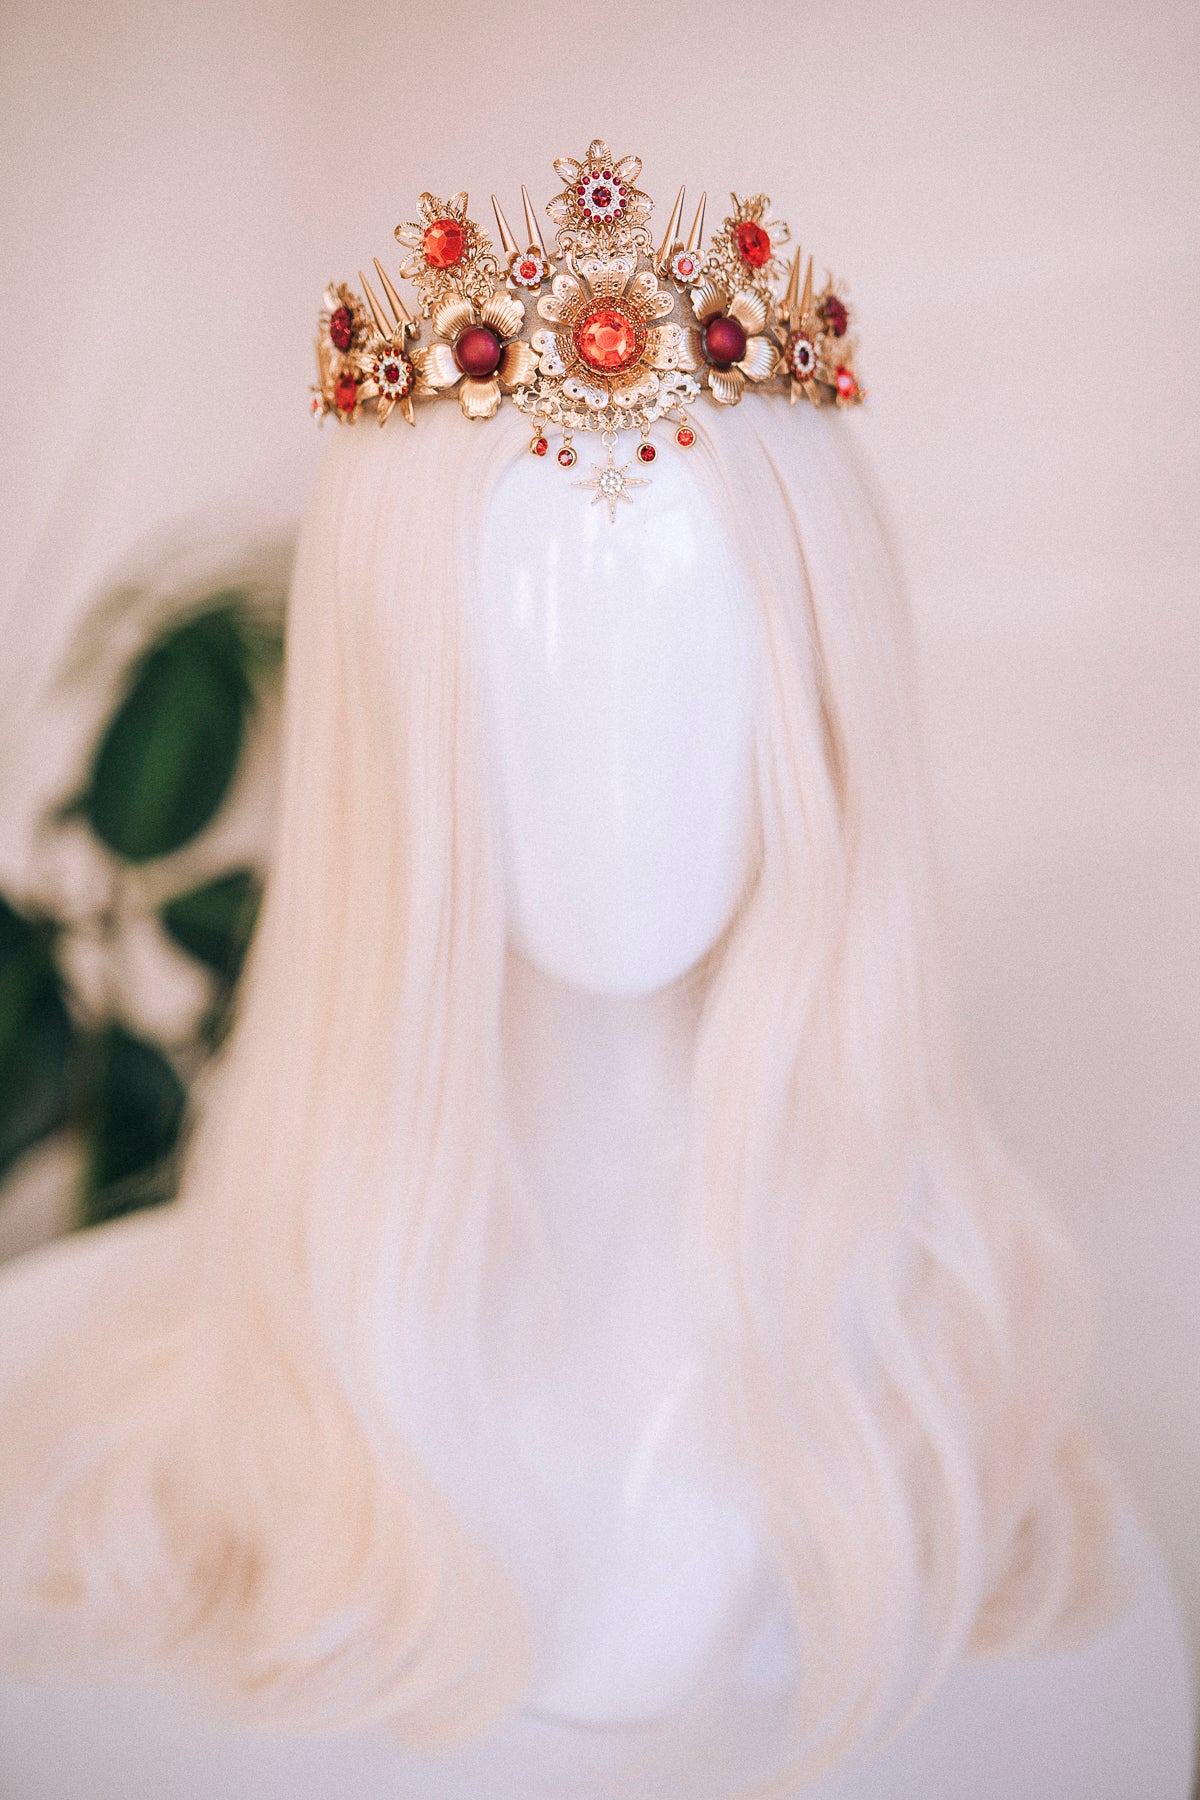 Load image into Gallery viewer, Red Wedding Tiara
